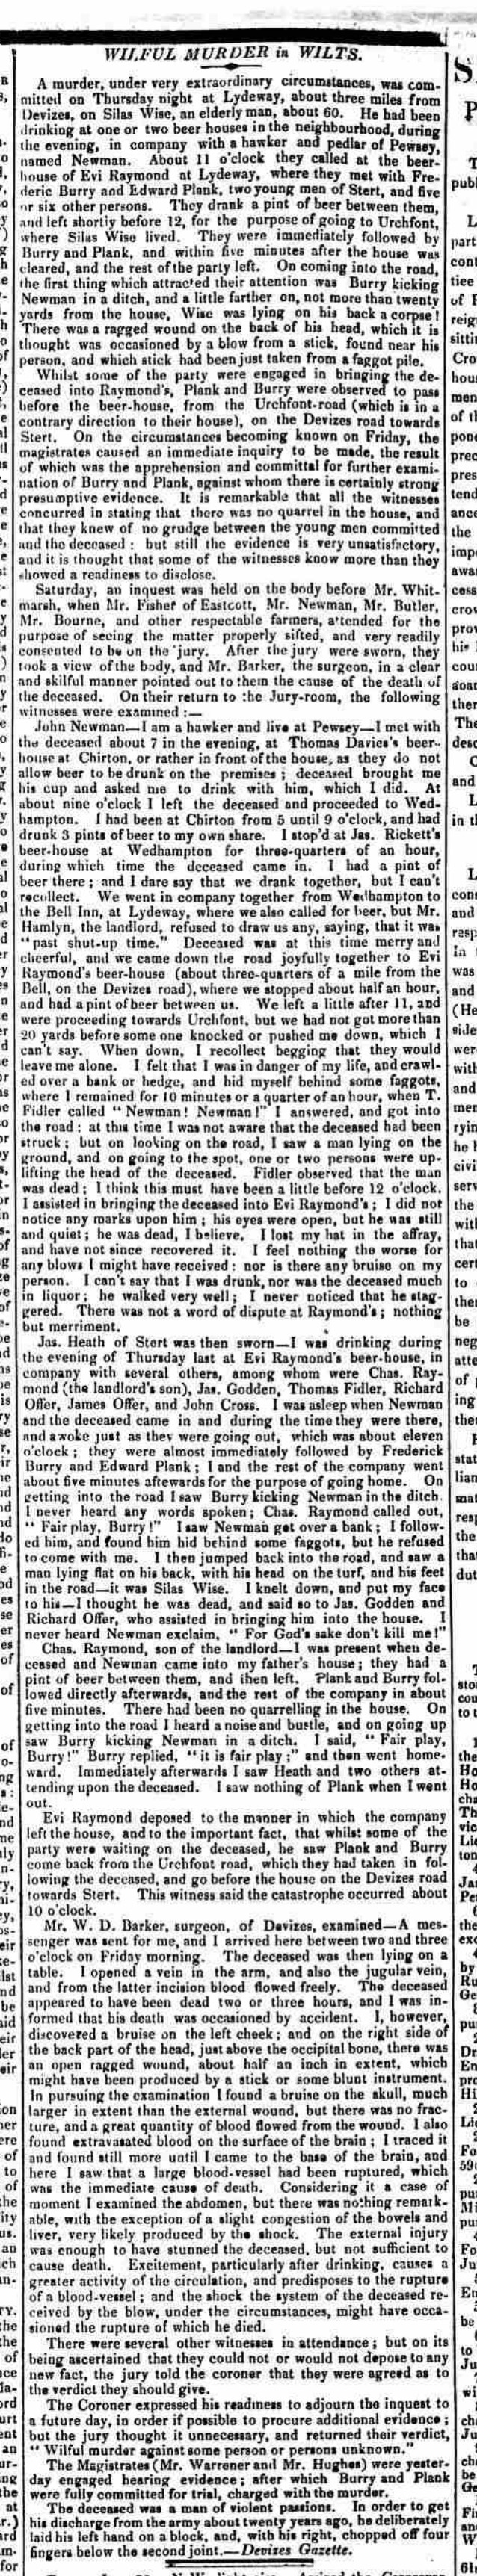 Wilful Murder in Wilts. Thomas Fidler first on scene discovering the body in 1837, most likely my ancestor.